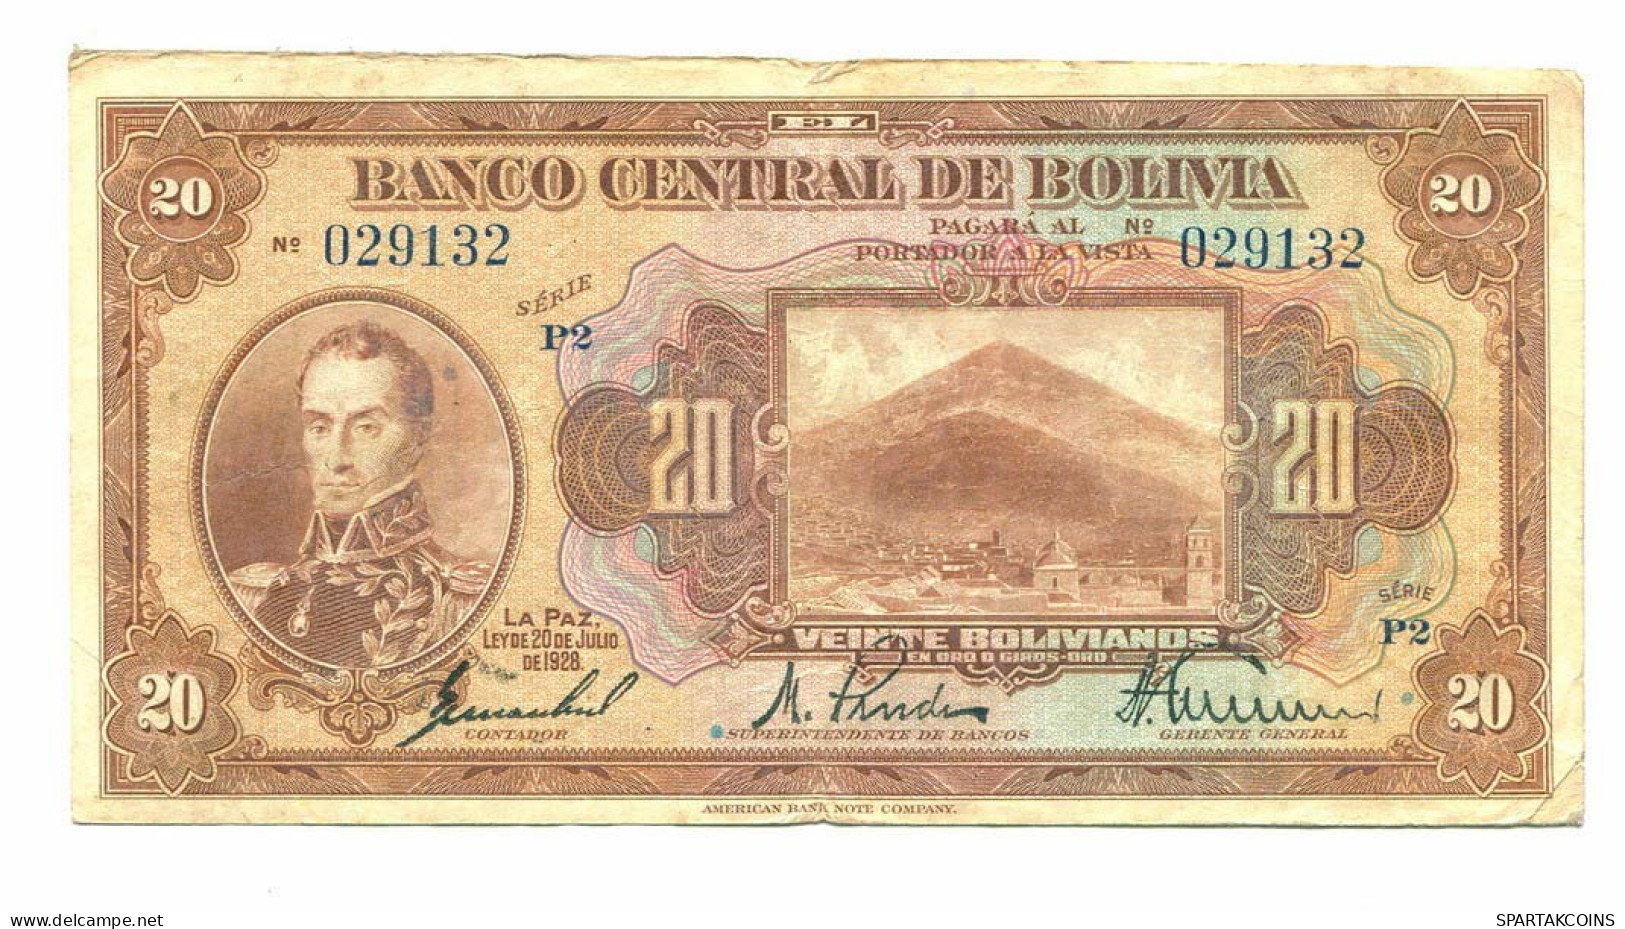 BOLIVIA 20 BOLIVIANOS 1928 SERIE P2 Paper Money Banknote #P10794.4 - [11] Local Banknote Issues